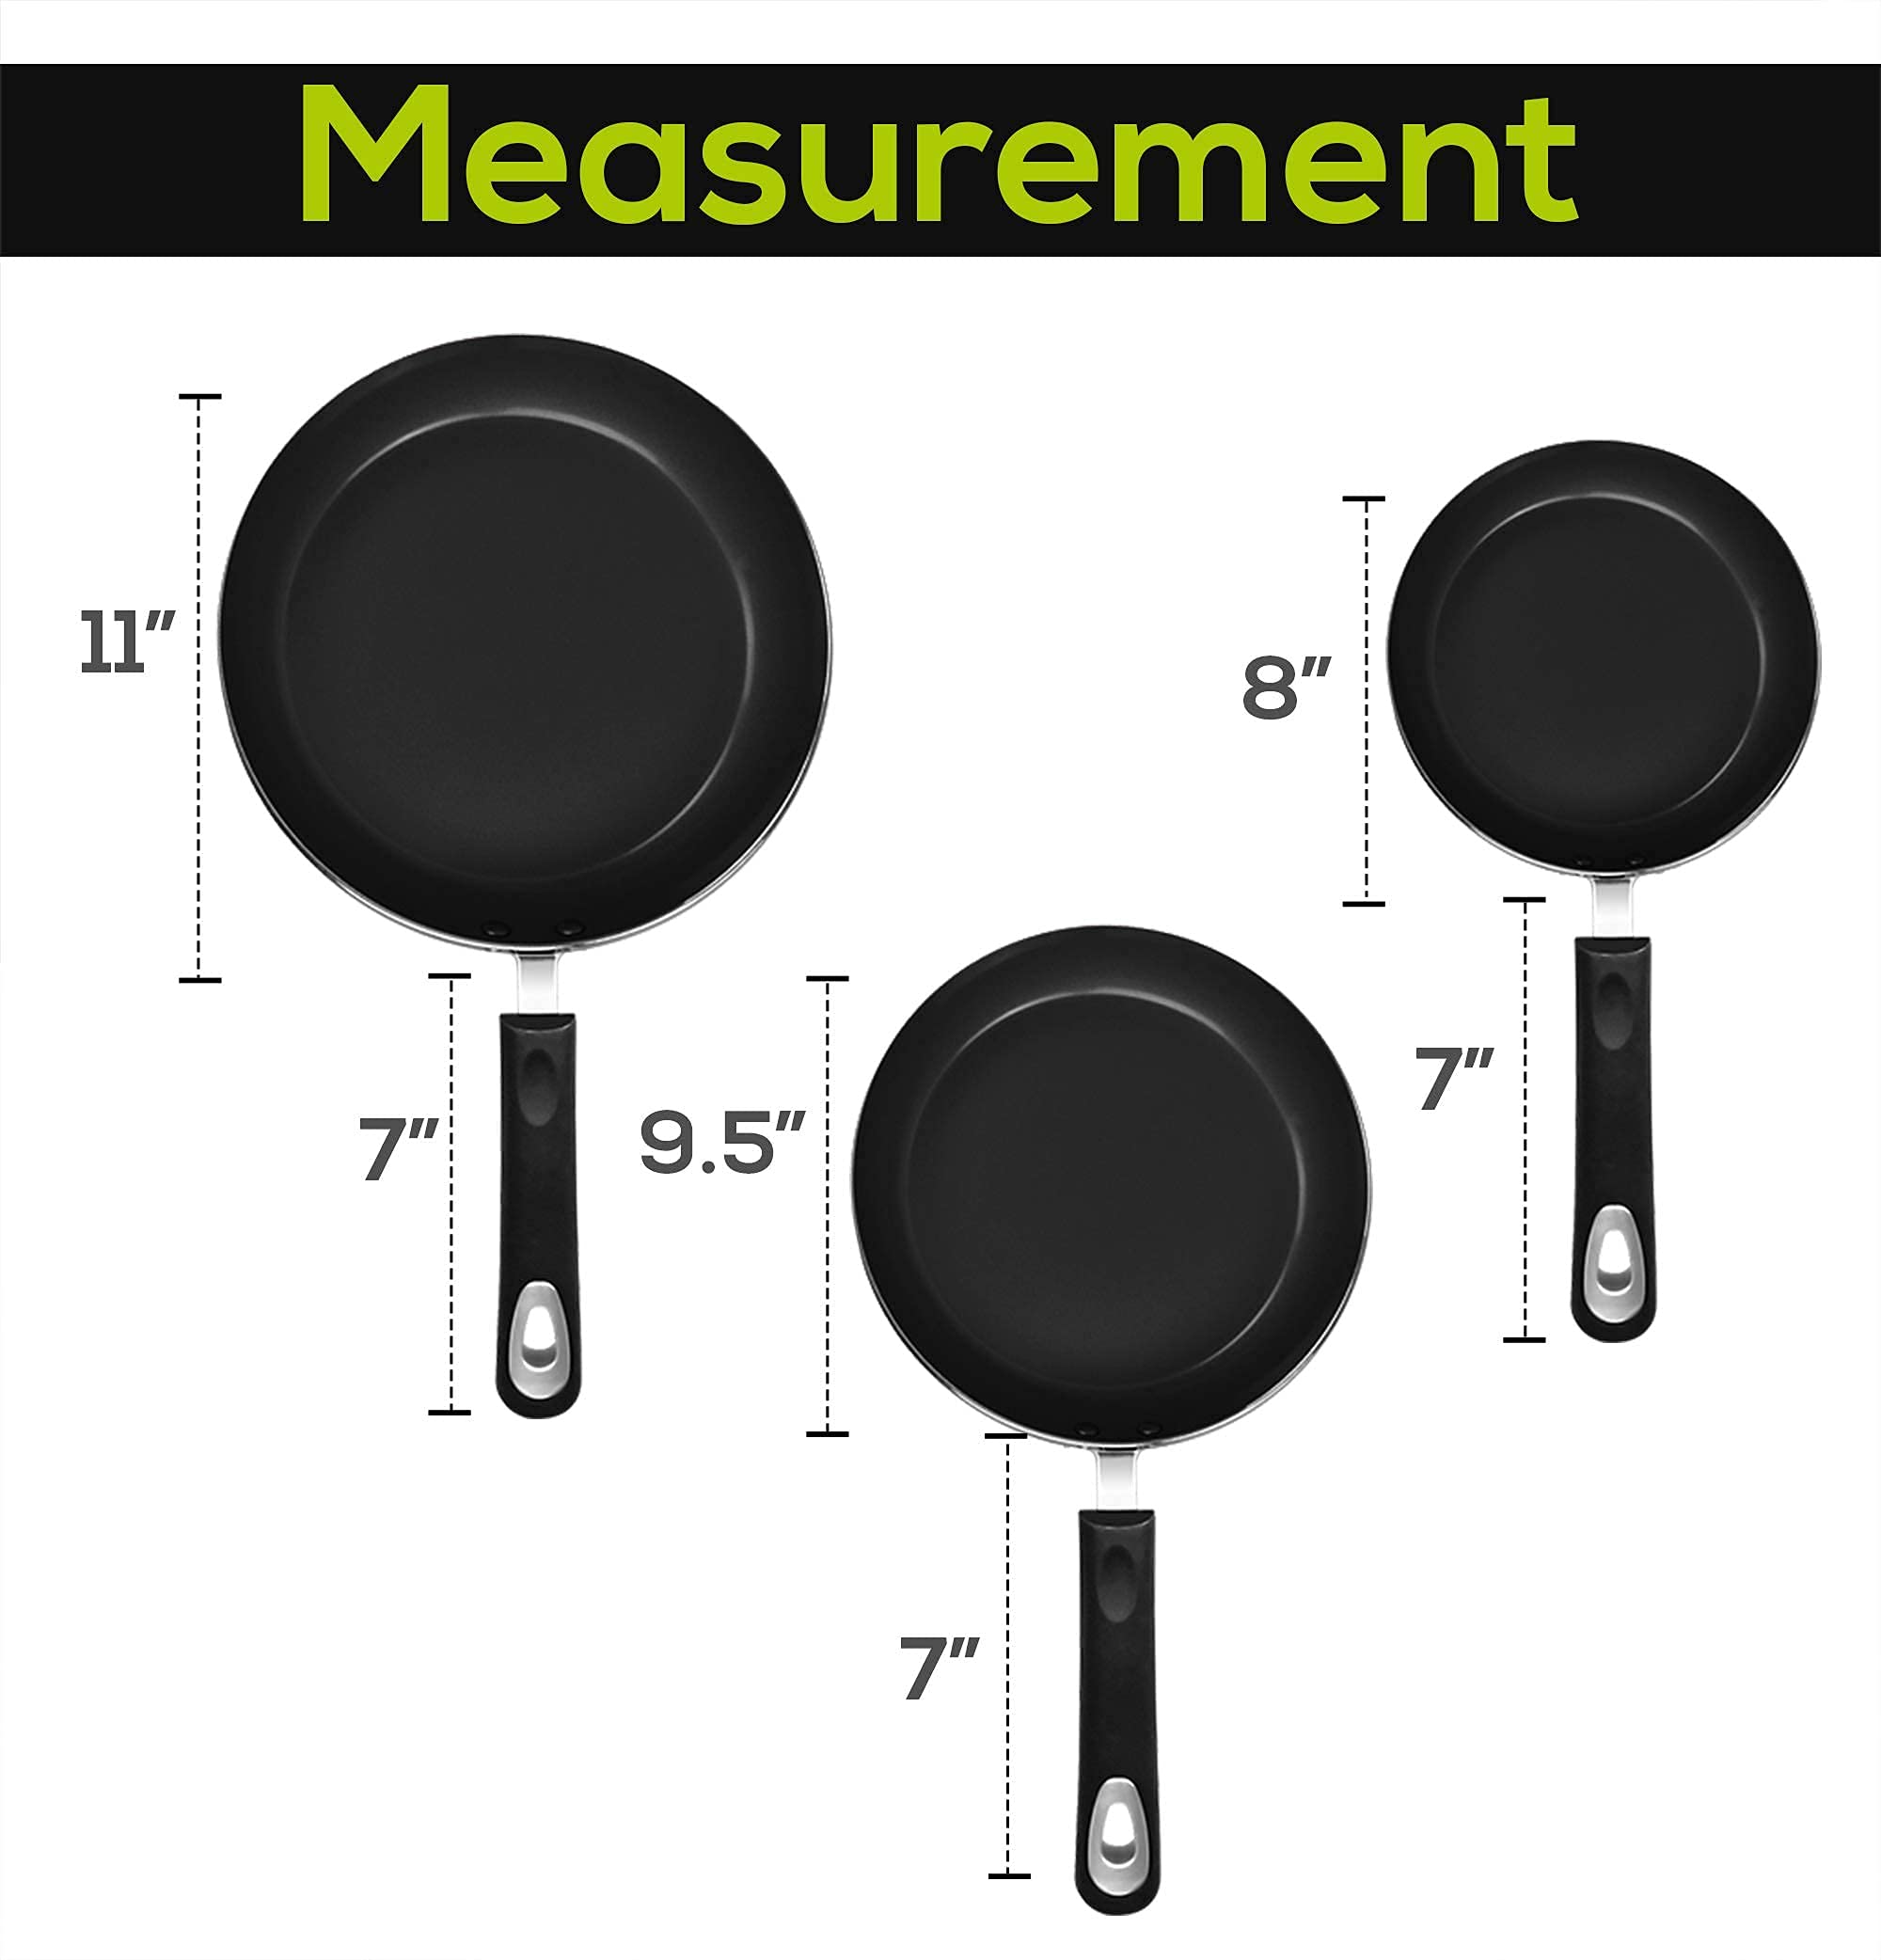 Utopia Kitchen Nonstick Frying Pan Set - 3 Piece Induction Bottom - 8 Inches, 95 Inches and 11 Inches (grey-Black)